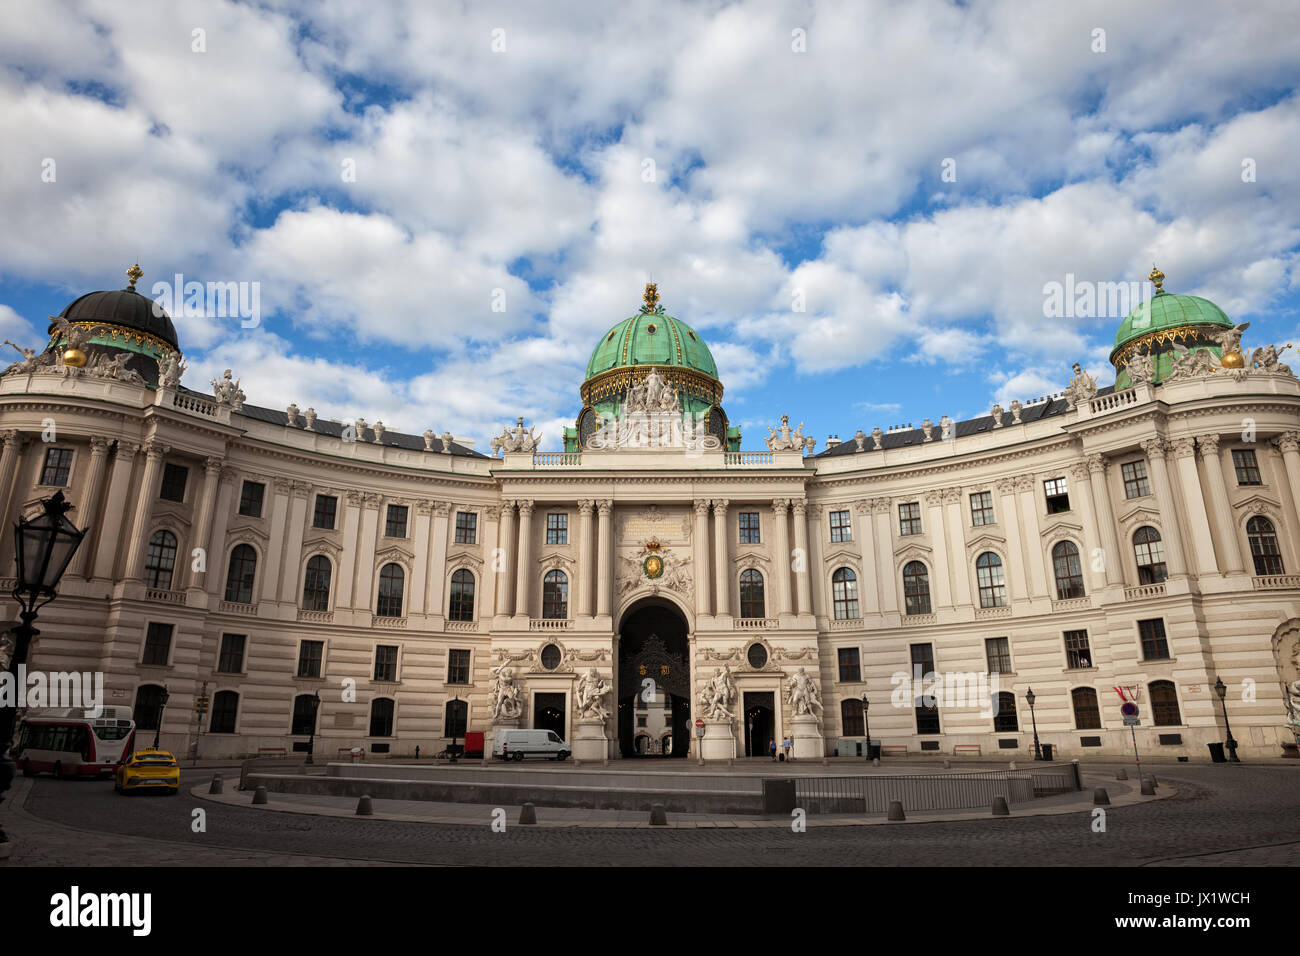 Hofburg Palace in capital city of Vienna in Austria, Michaelertrakt - St. Michael's Wing, former Habsburgs' Winter Imperial Residence Stock Photo